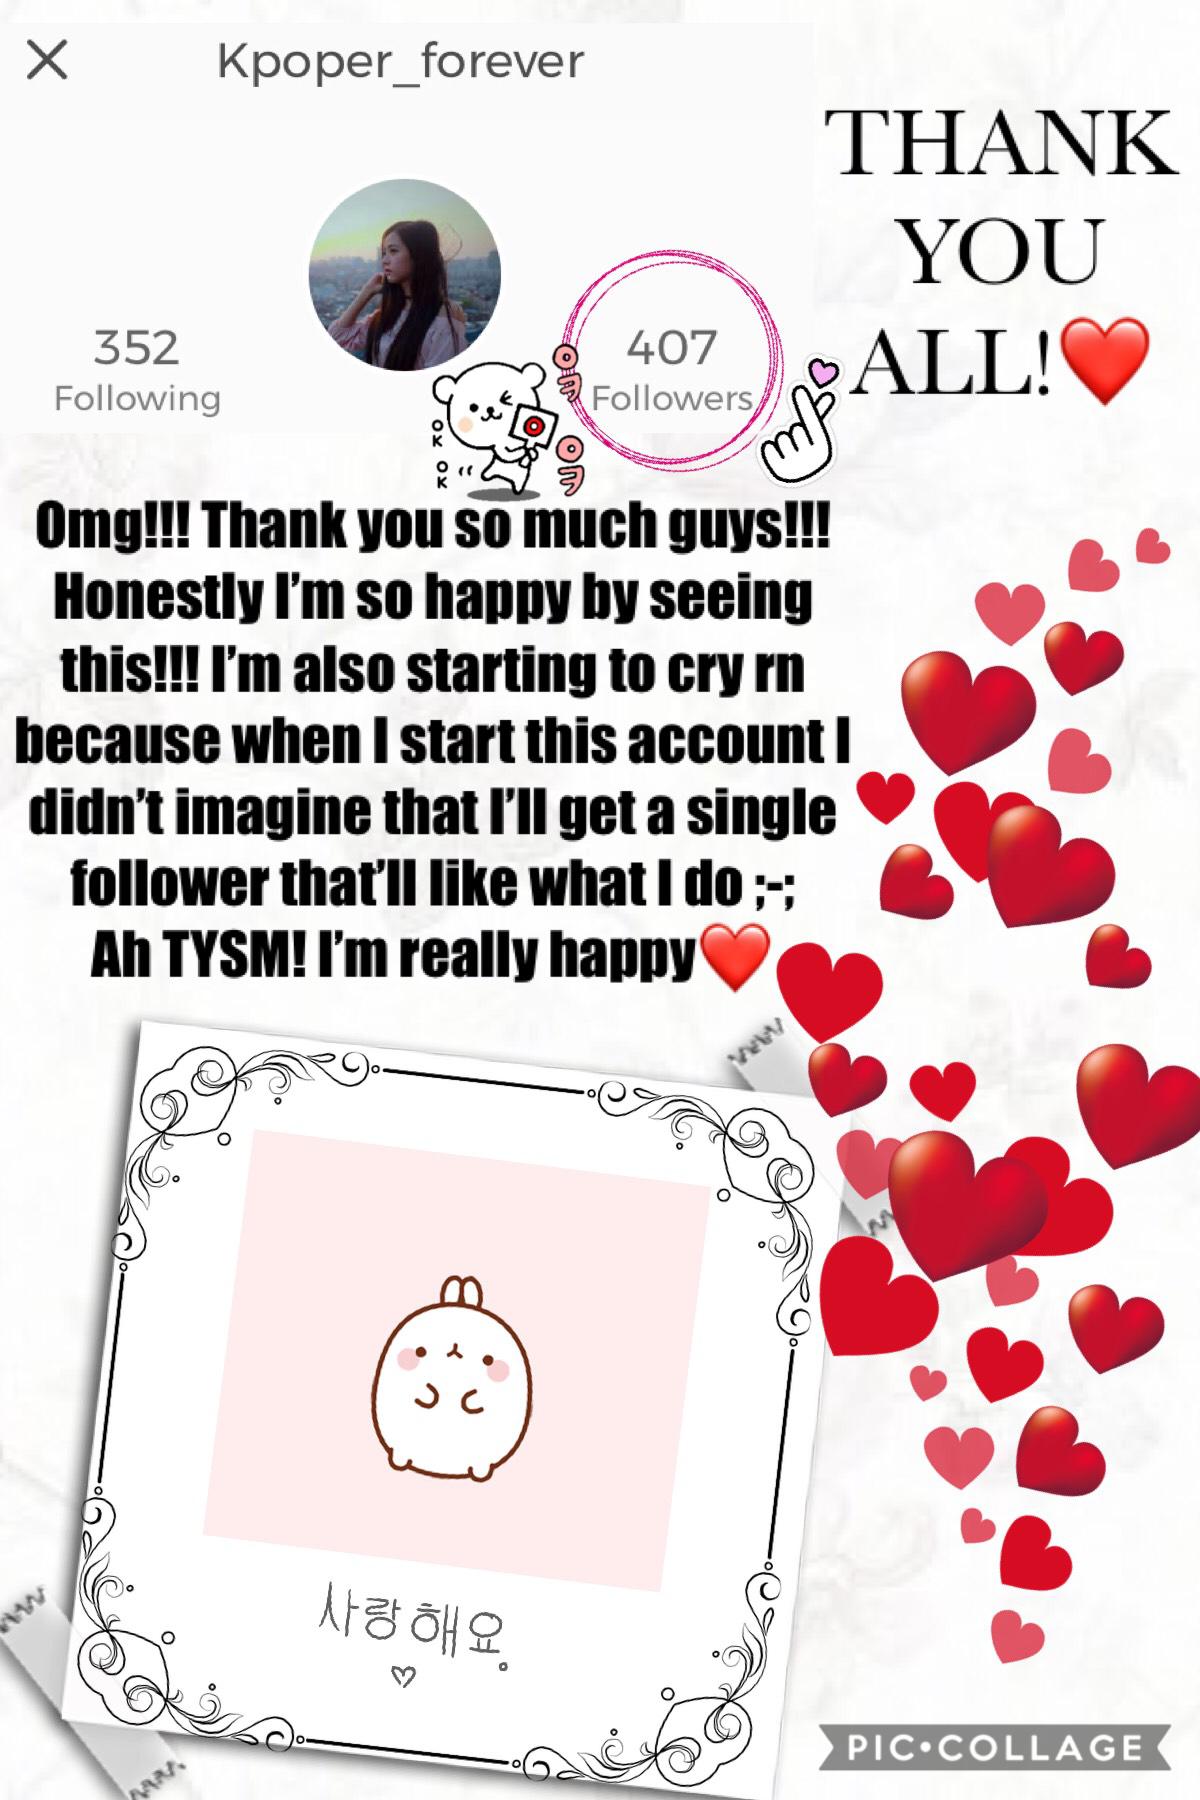 ❤️TAP❤️
Thank you so much guys!!!
Finally I’m thinking to do something to celebrate this✨ so comment what you would like me to do ;D 
♥️❤️LYSM❤️♥️